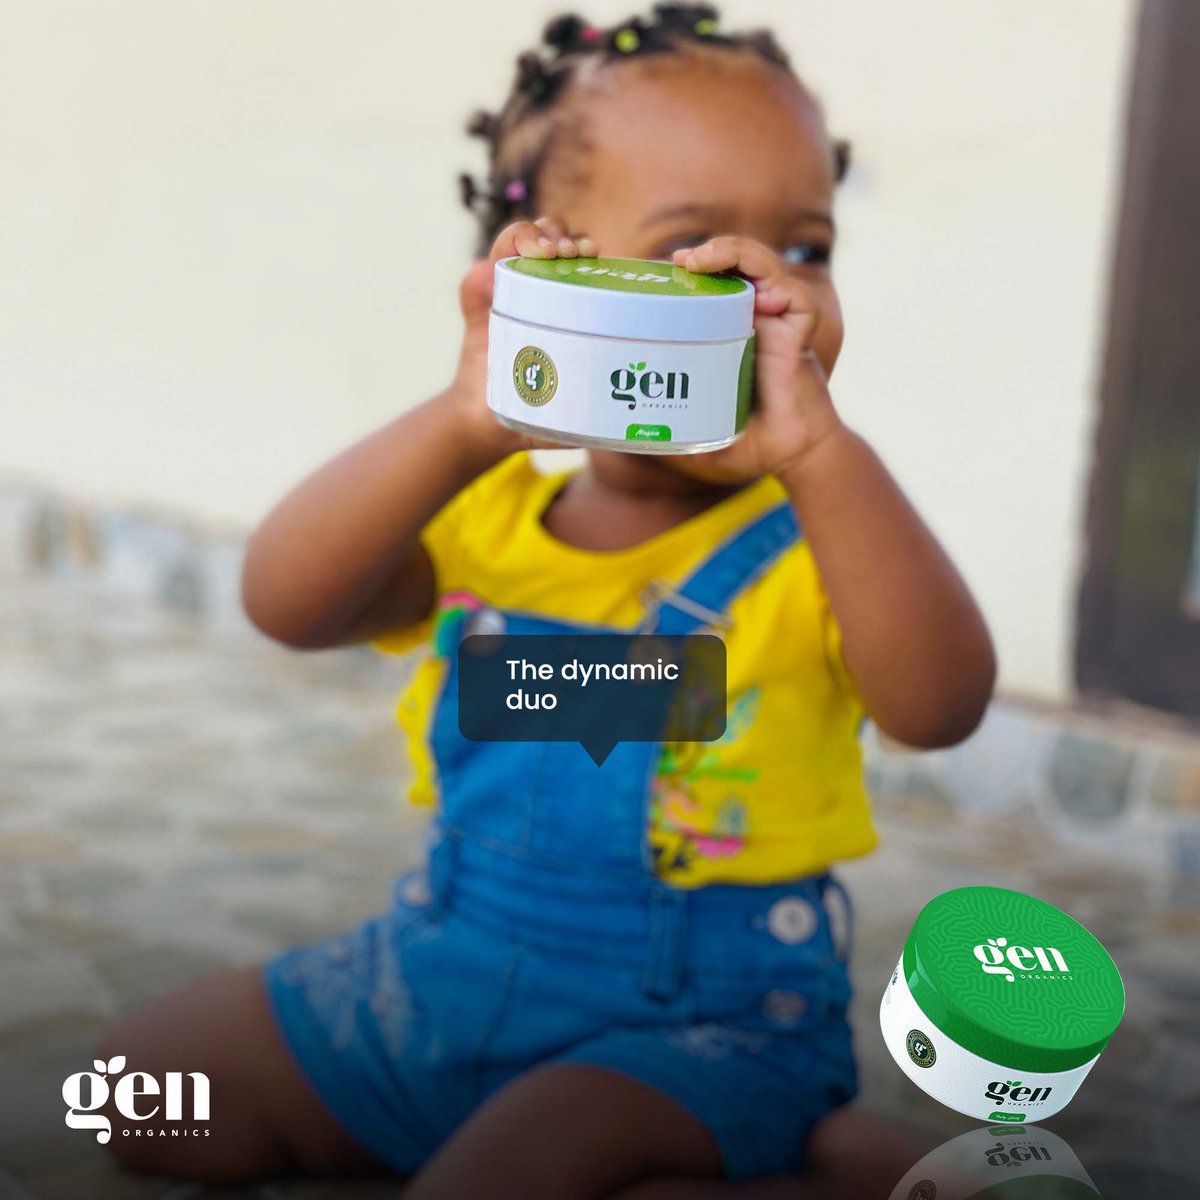 We all deserve a natural,organic and beautiful skin. Unlock your beauty with 100% organic solutions from @GenOrganics. For your authentic vaseline and soap DM @GenOrganics or call 0778471524